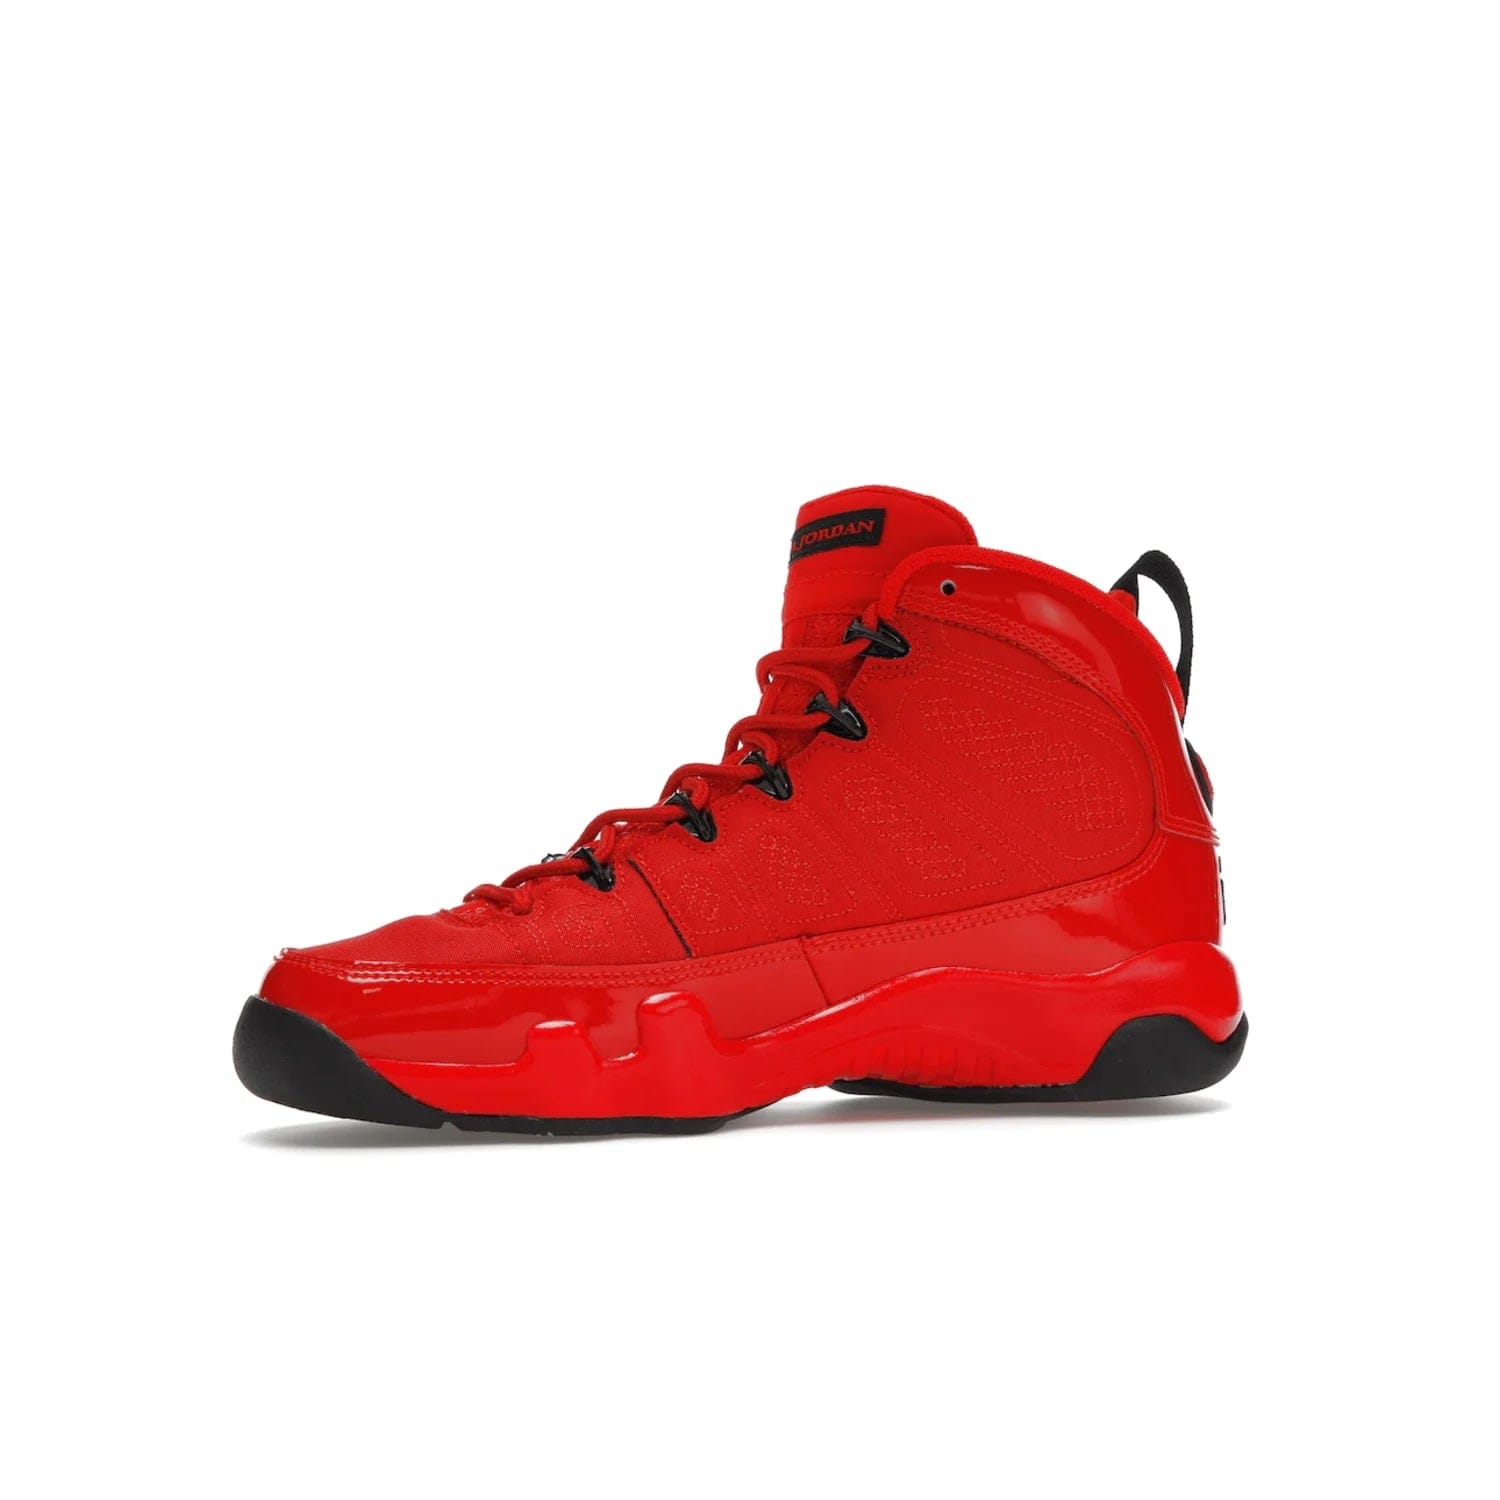 Jordan 9 Retro Chile Red (GS) - Image 17 - Only at www.BallersClubKickz.com - Introducing the Air Jordan 9 Retro Chile Red (GS), a vintage 1993 silhouette with fiery colorway. Features quilted side paneling, glossy patent leather, pull tabs, black contrast accents, and foam midsole. Launching May 2022 for $140.